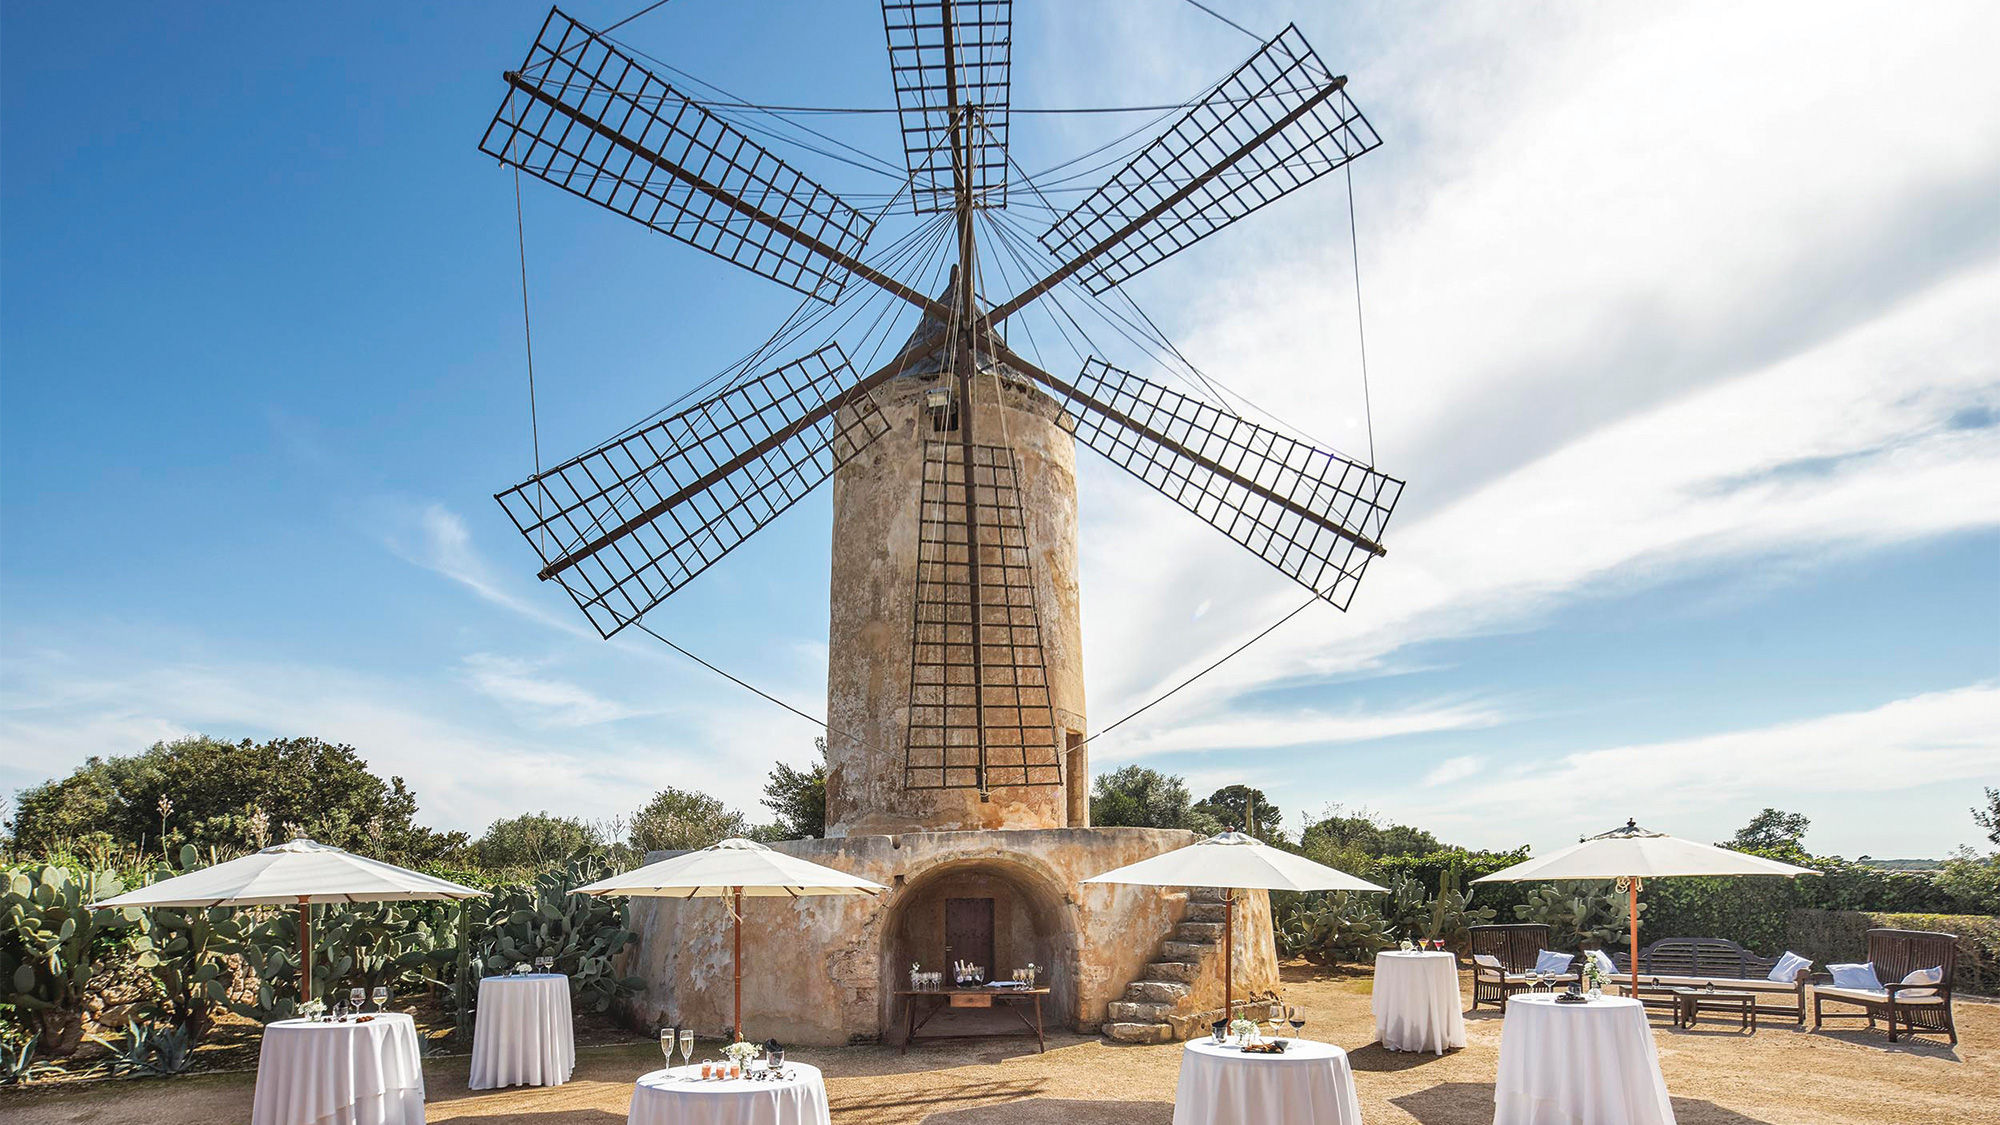 The Zoetry Mallorca's windmill is marketed as the ideal backdrop for cocktail hour at a wedding reception.